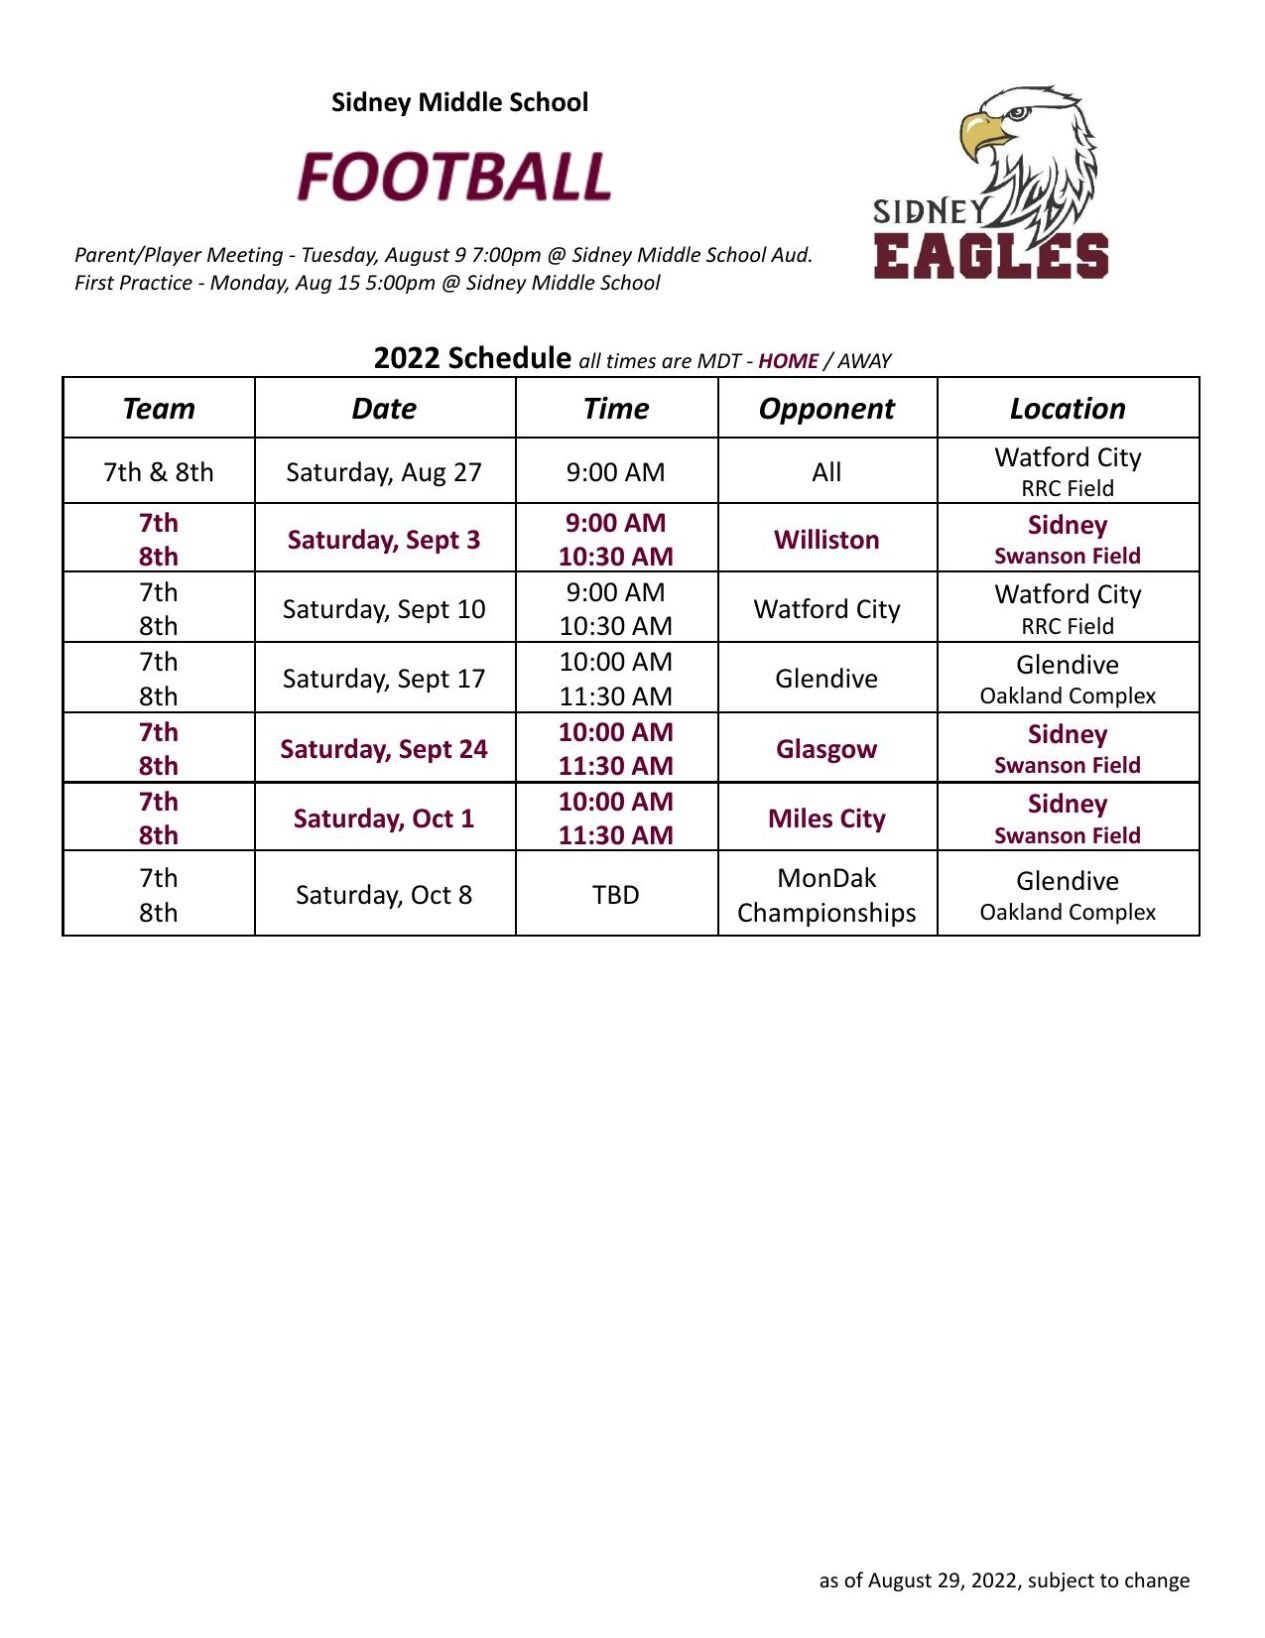 Sidney Eagles MS football schedule